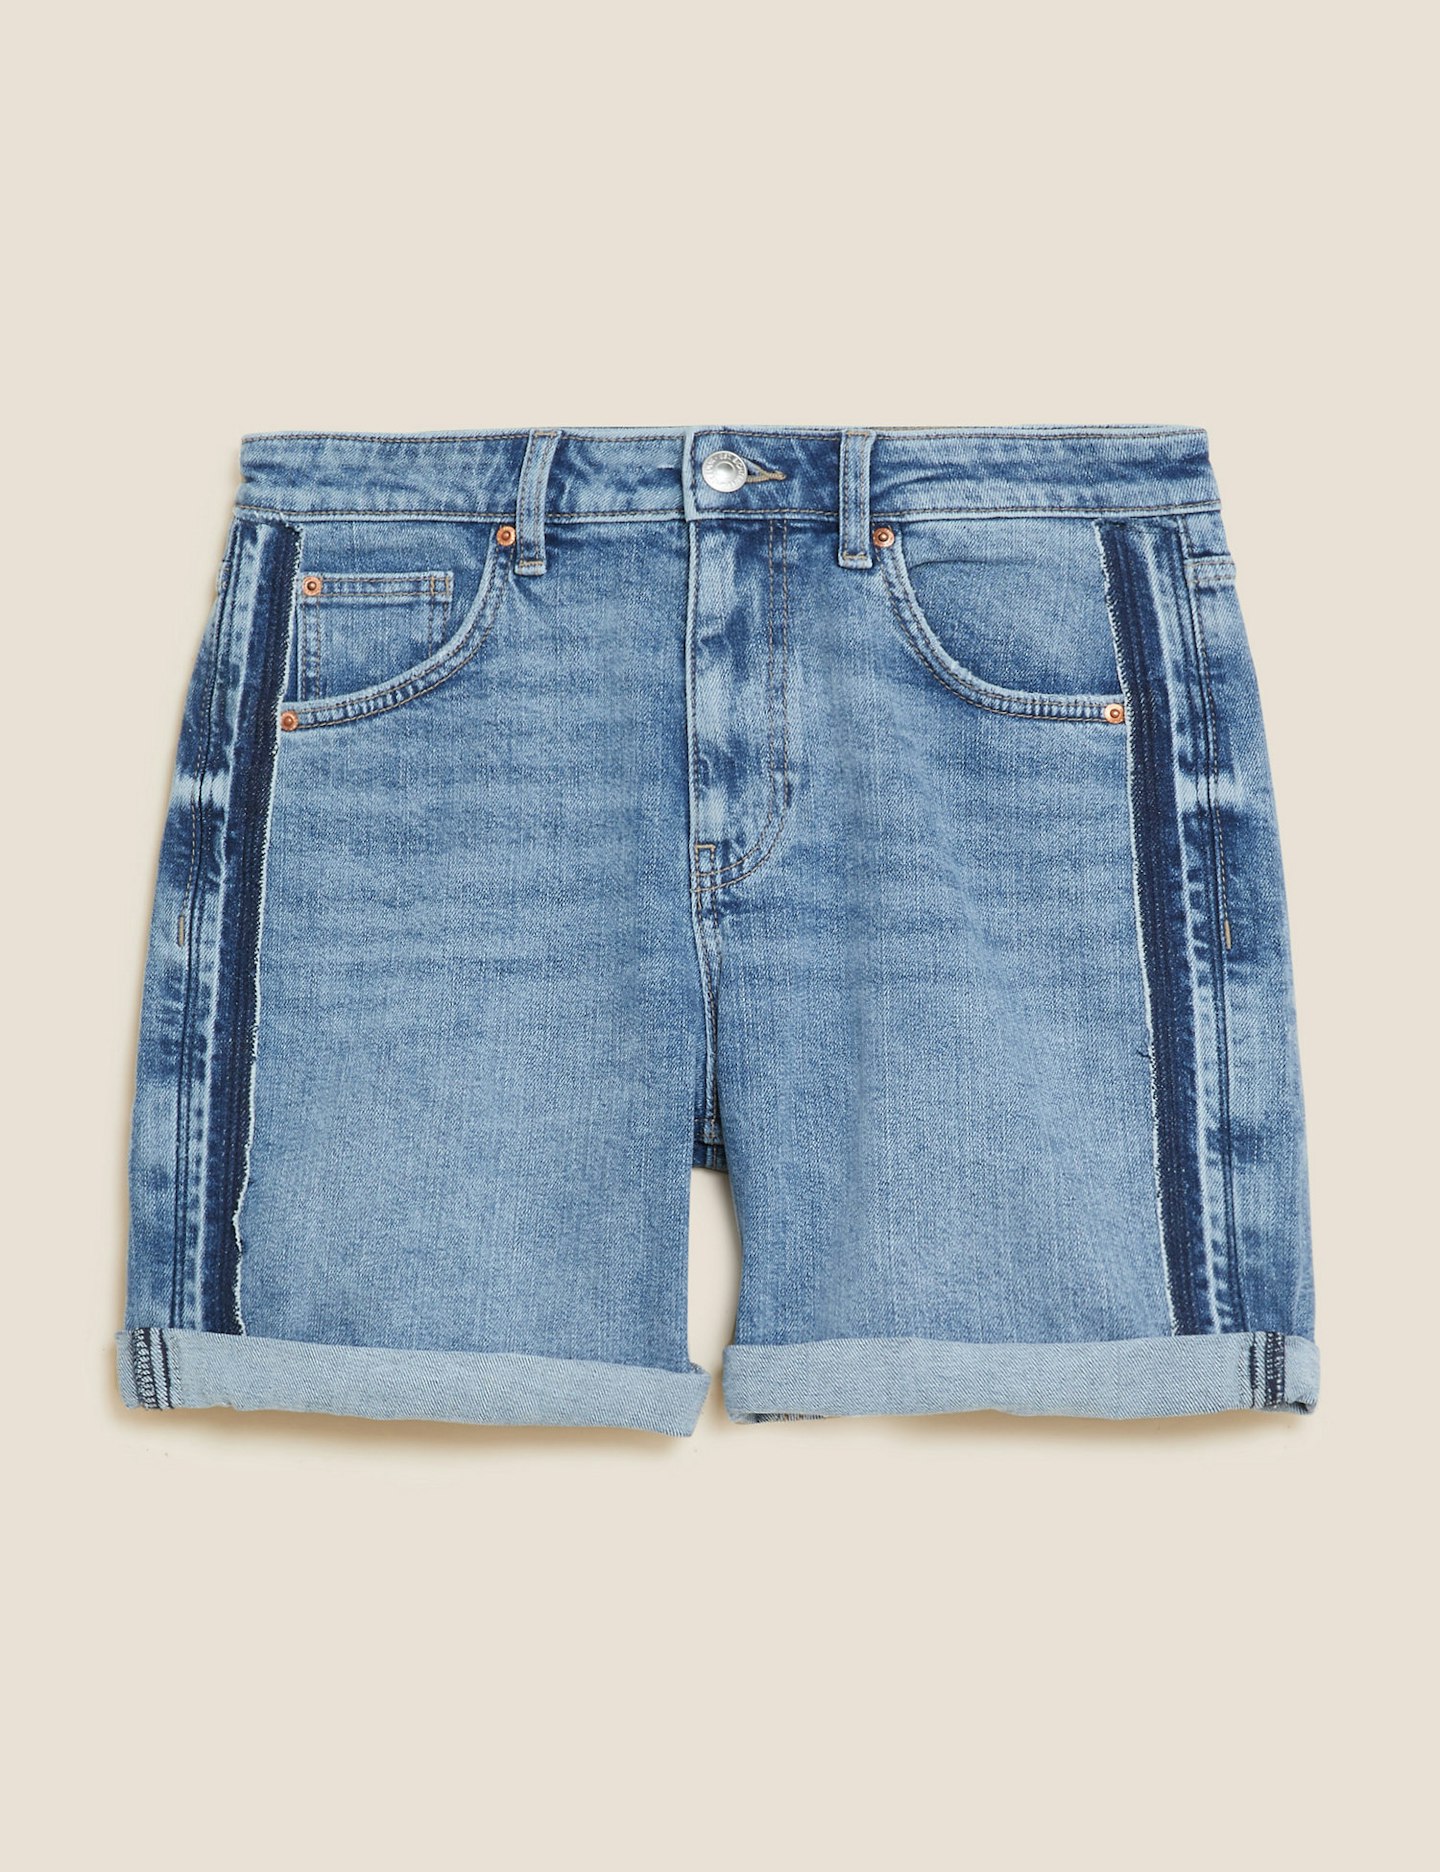 Holly Willoughby marks and Spencer summer edit Denim Boyfriend Shorts, £25